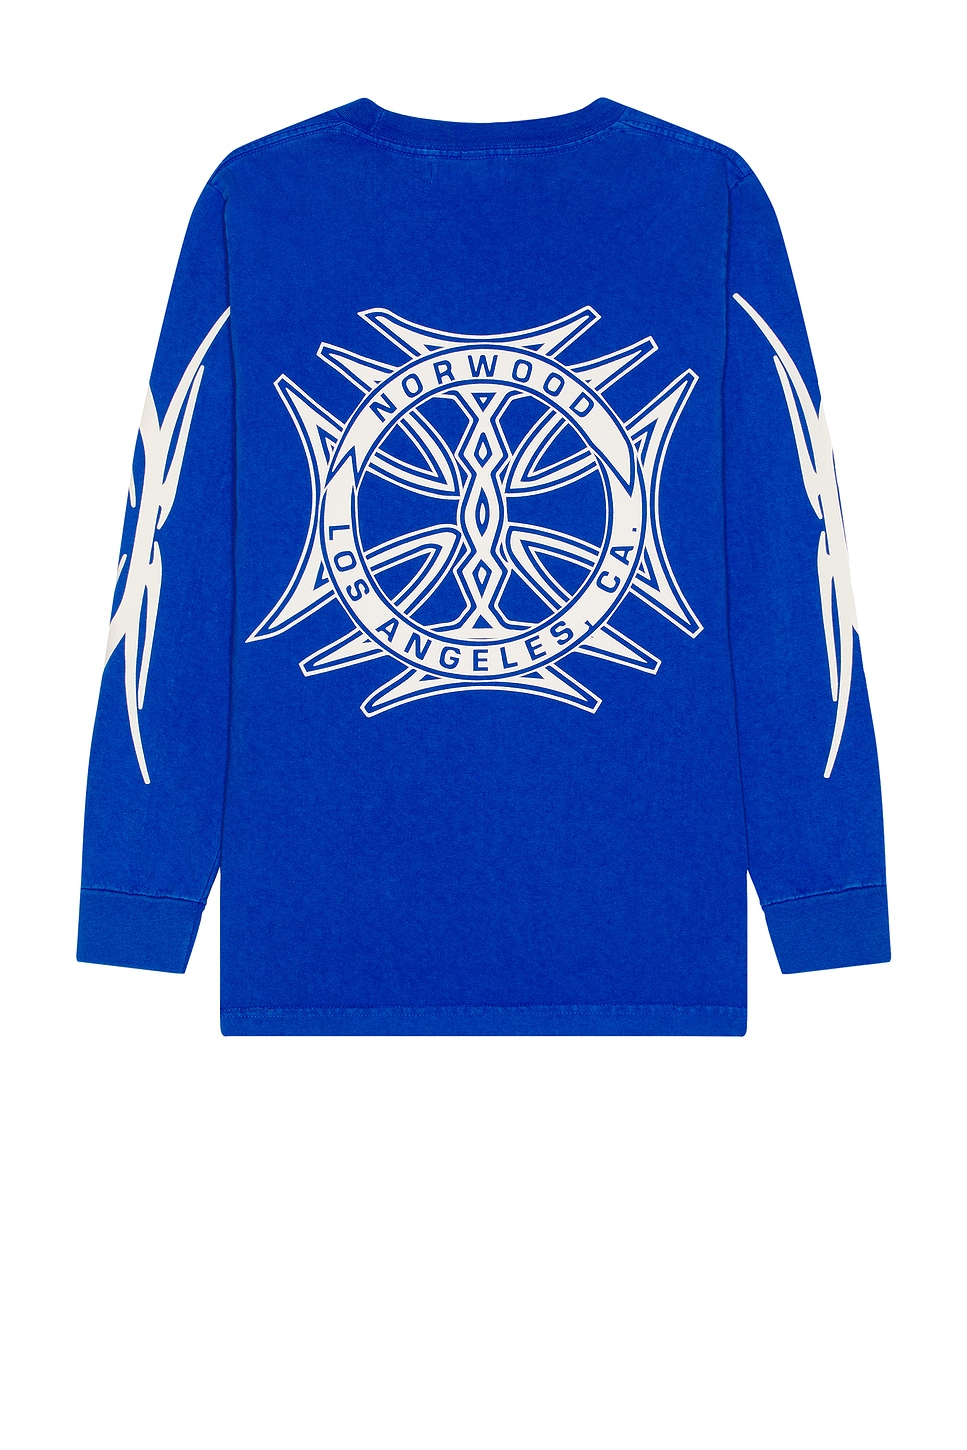 Image 1 of Norwood God Willing Long Sleeve Tee in Royal Blue